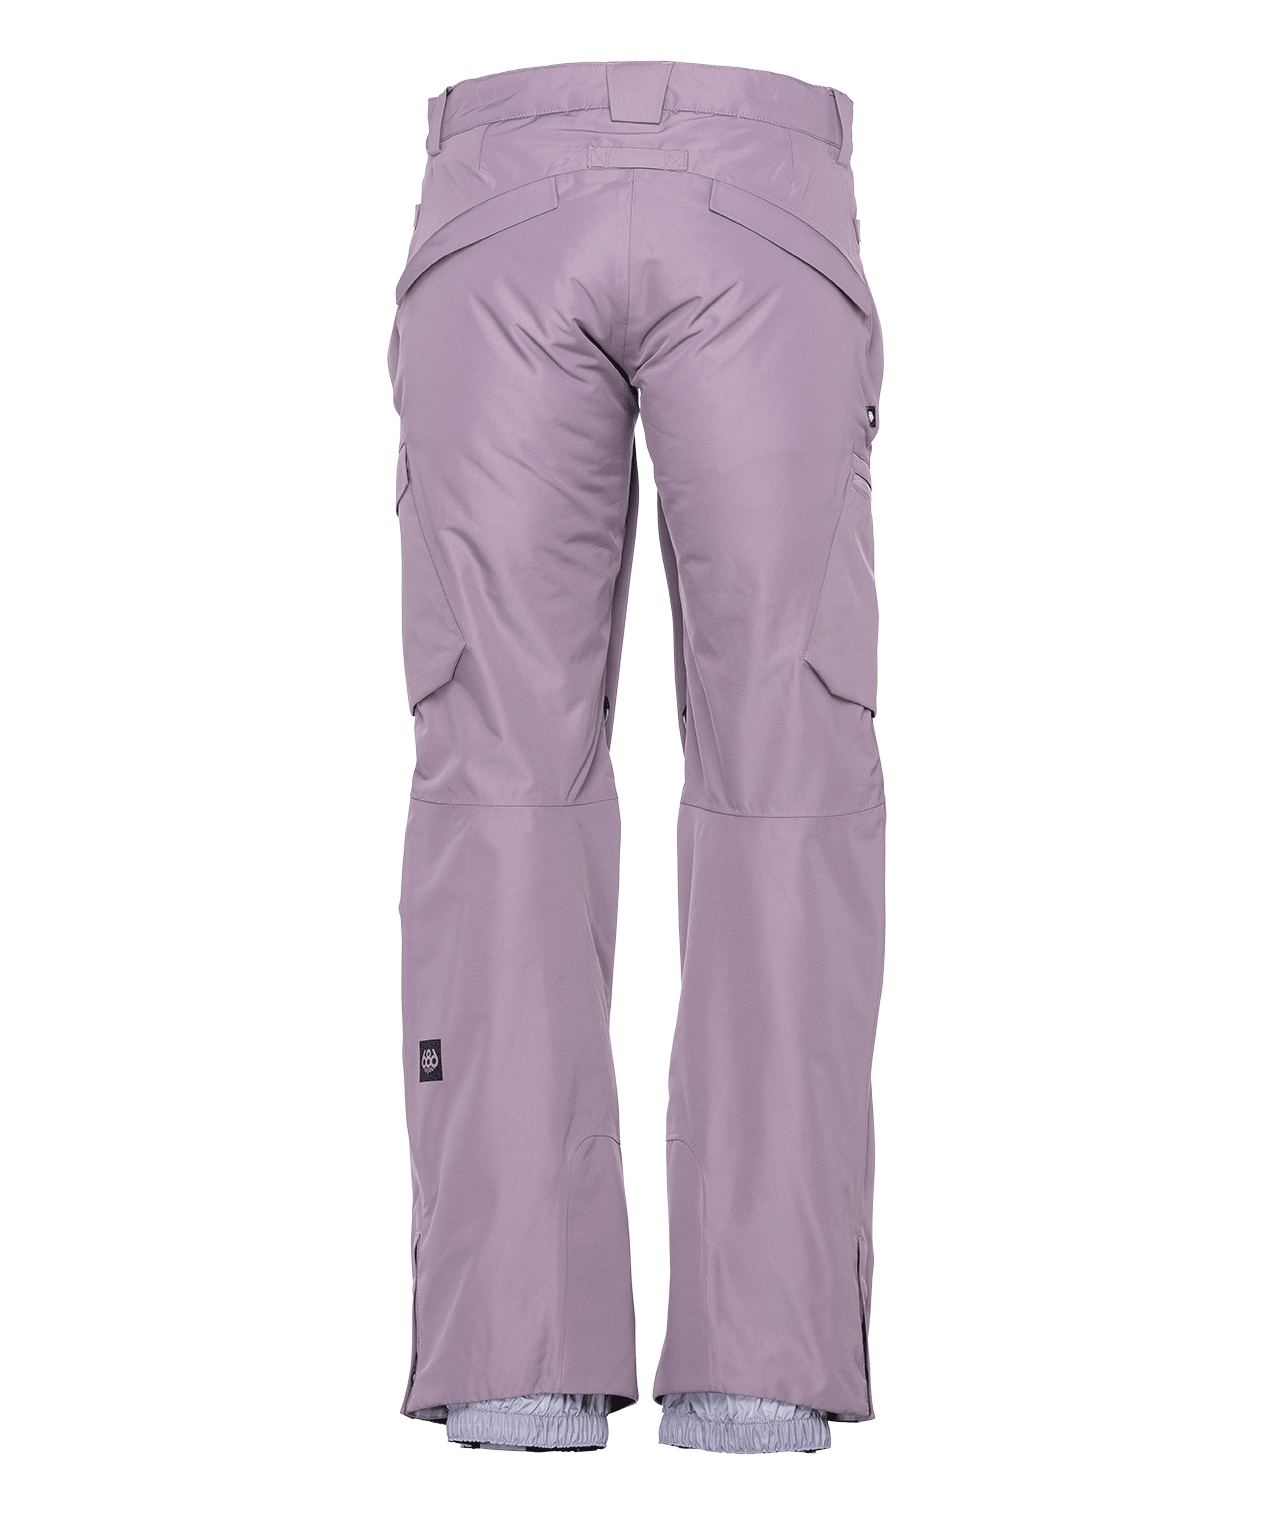 686 Women's Geode Thermagraph Snowboard Pants Dusty Orchid 2023 Women's Snow Pants 686 